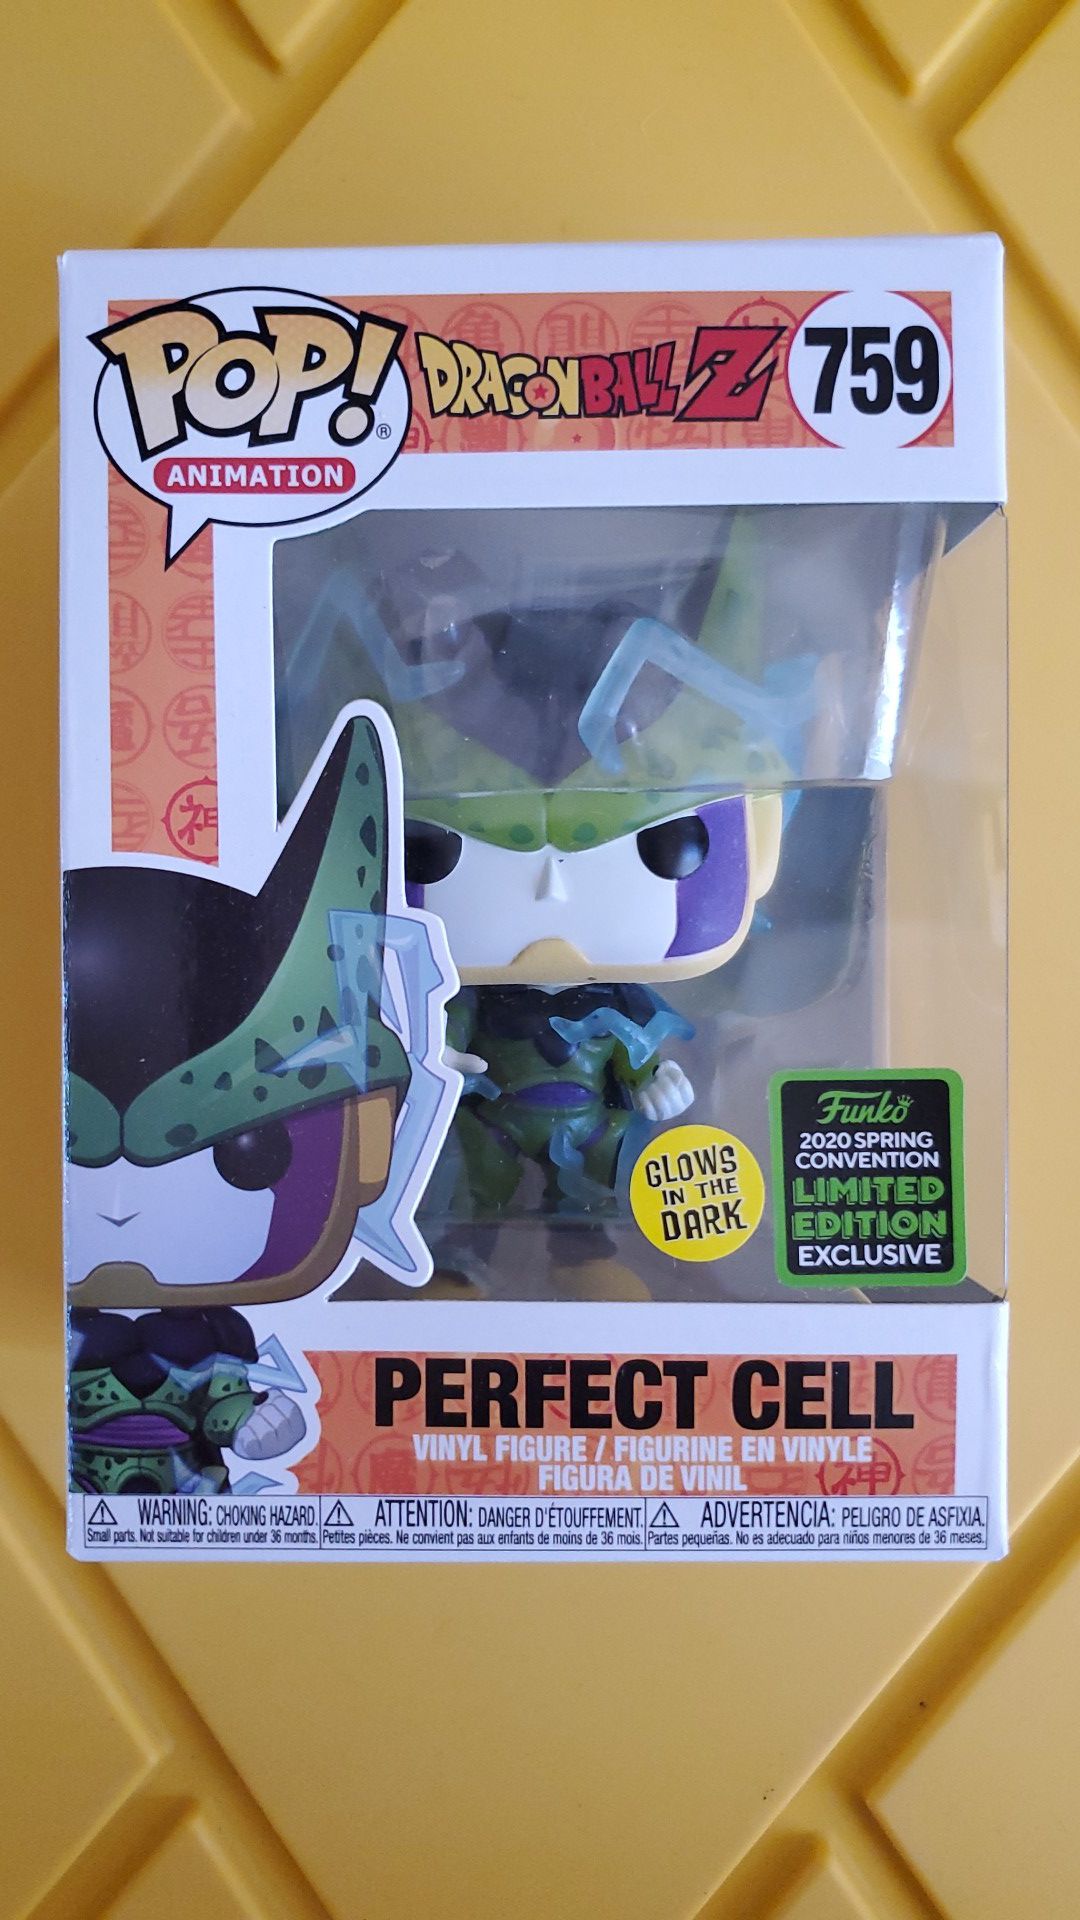 Funko Pop Dragonball Z Perfect Cell Glows in the Dark 2020 Spring Convention Exclusive